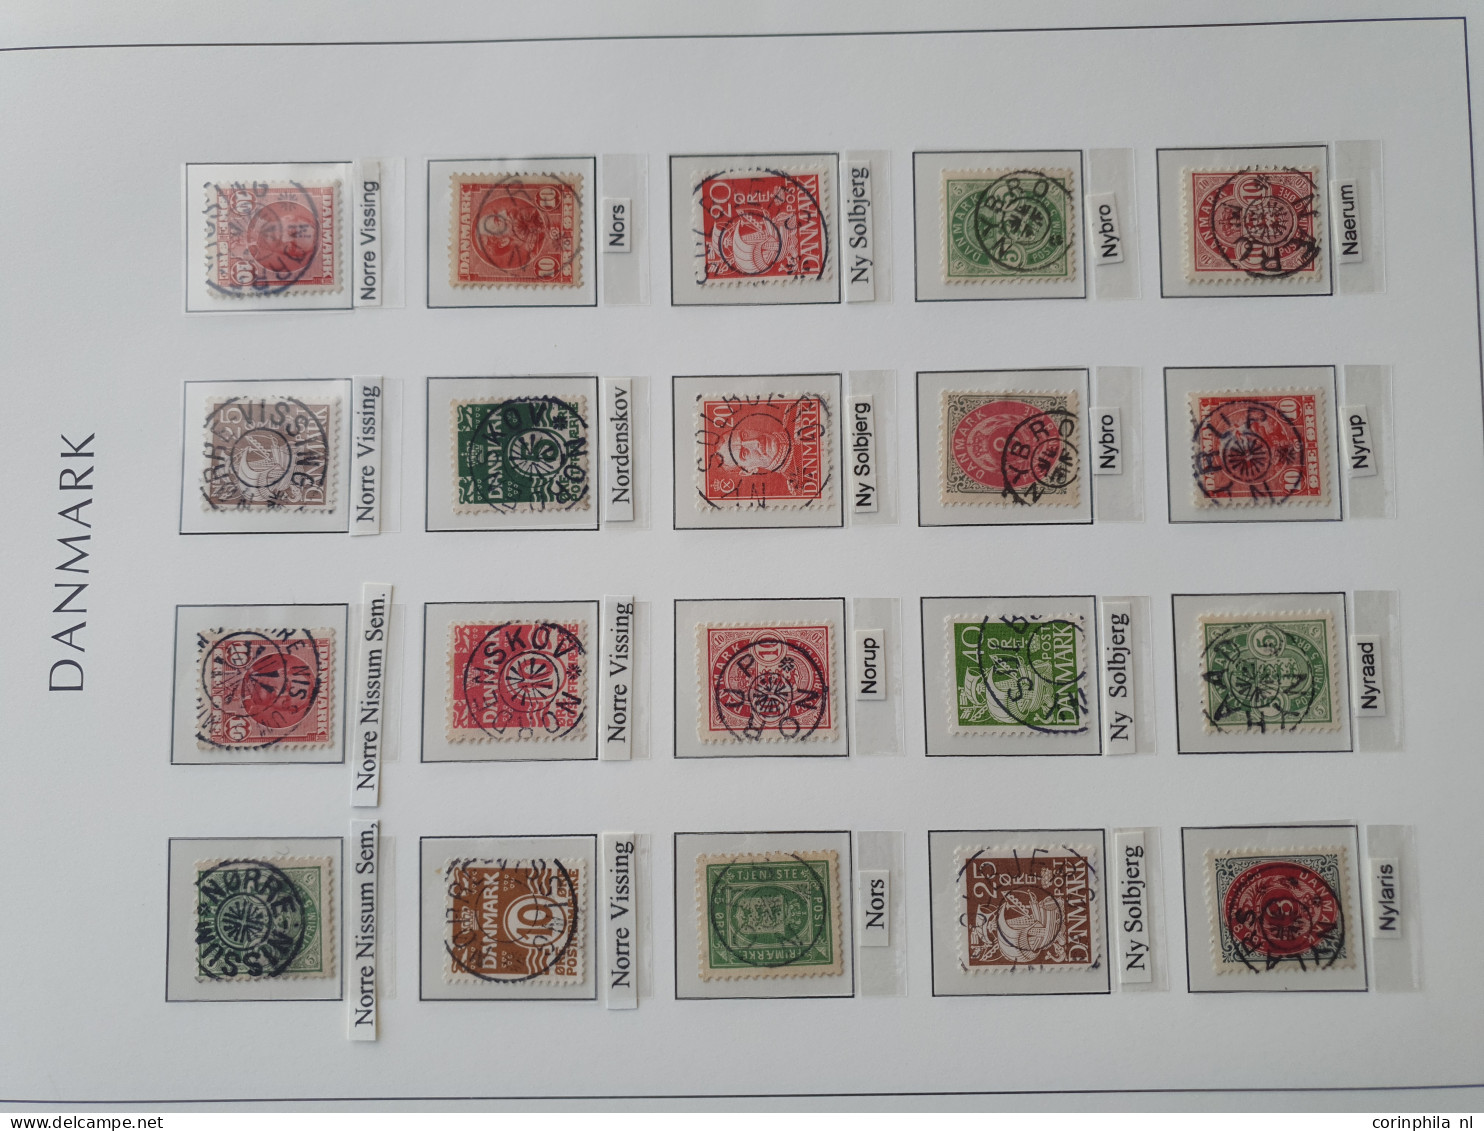 1874/1940, Star cancellations (Stjernestempler), comprehensive and advanced collection with ca.3200 stamps/fragments, 42